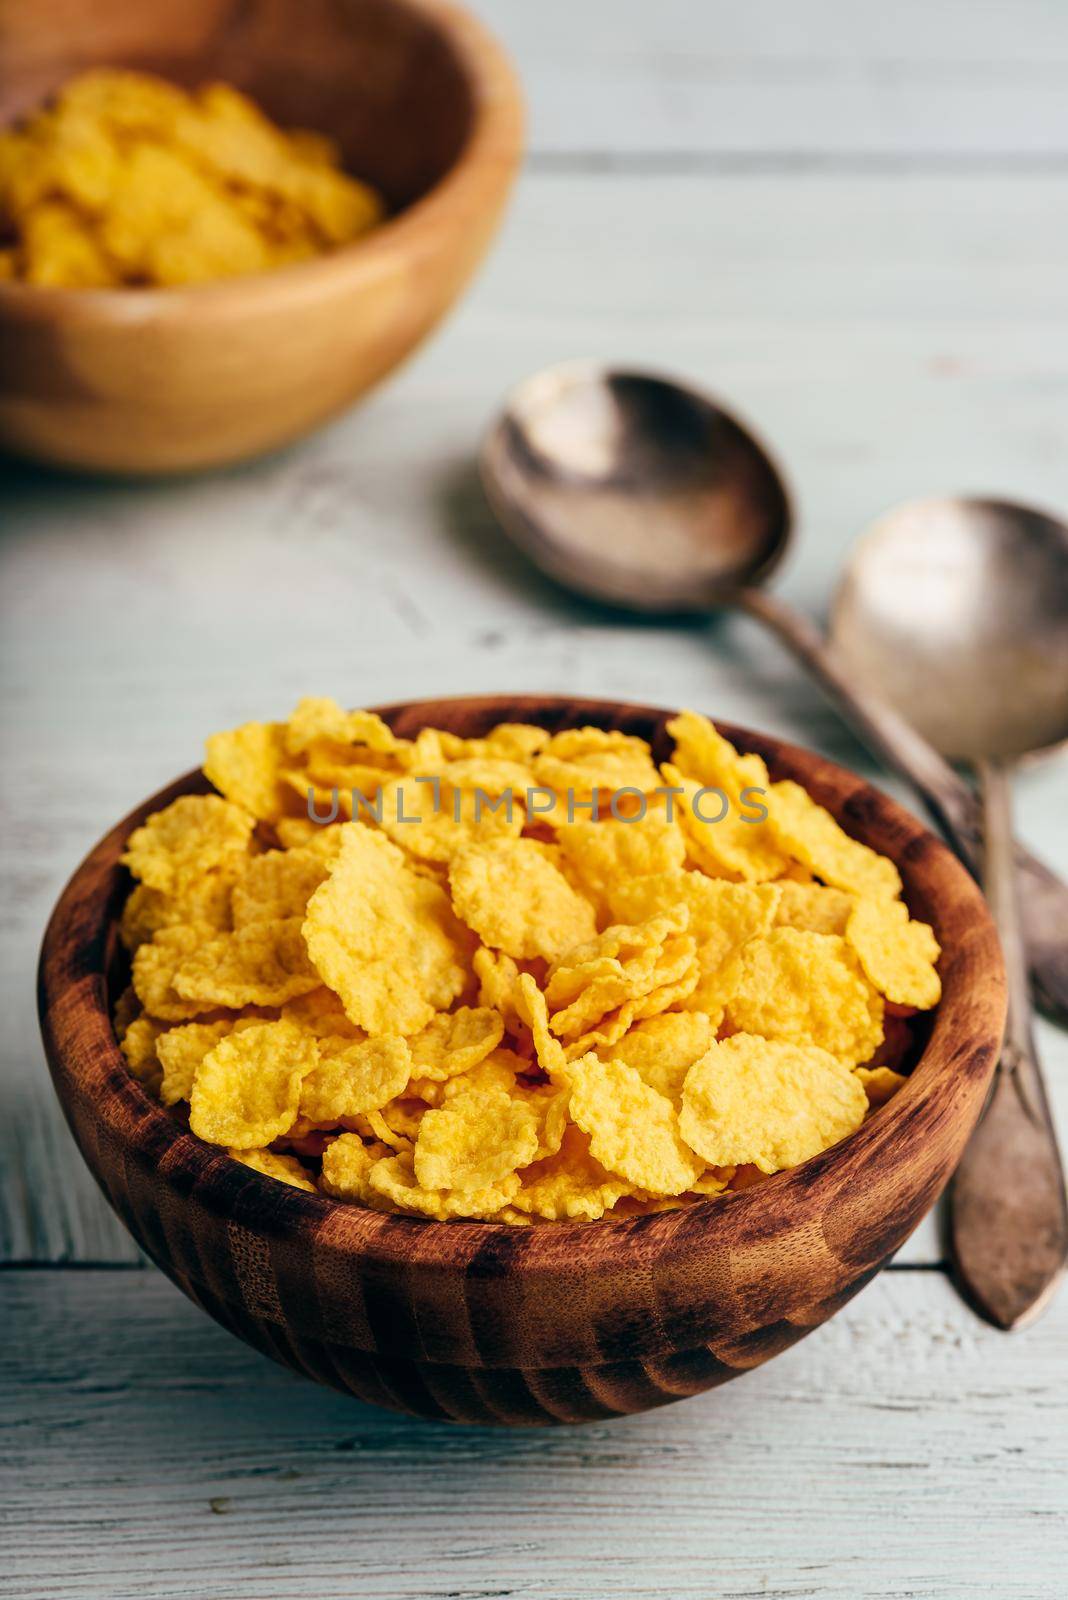 Rustic bowls of cornflakes with spoons by Seva_blsv